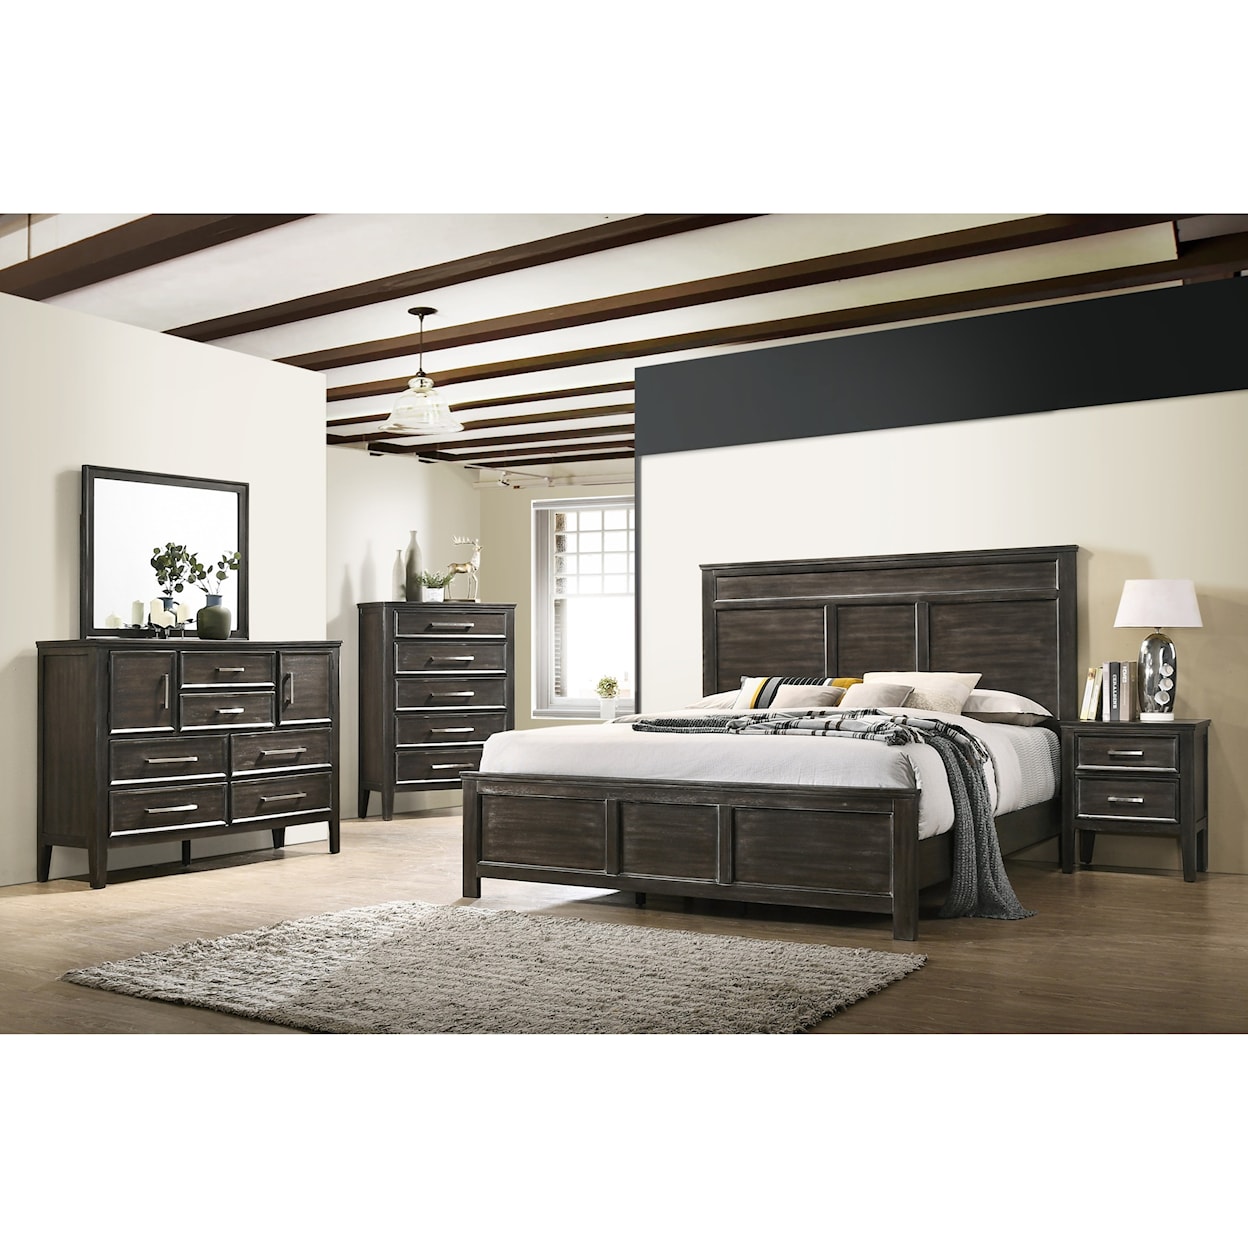 New Classic Andover 7PC Queen Bedroom Group